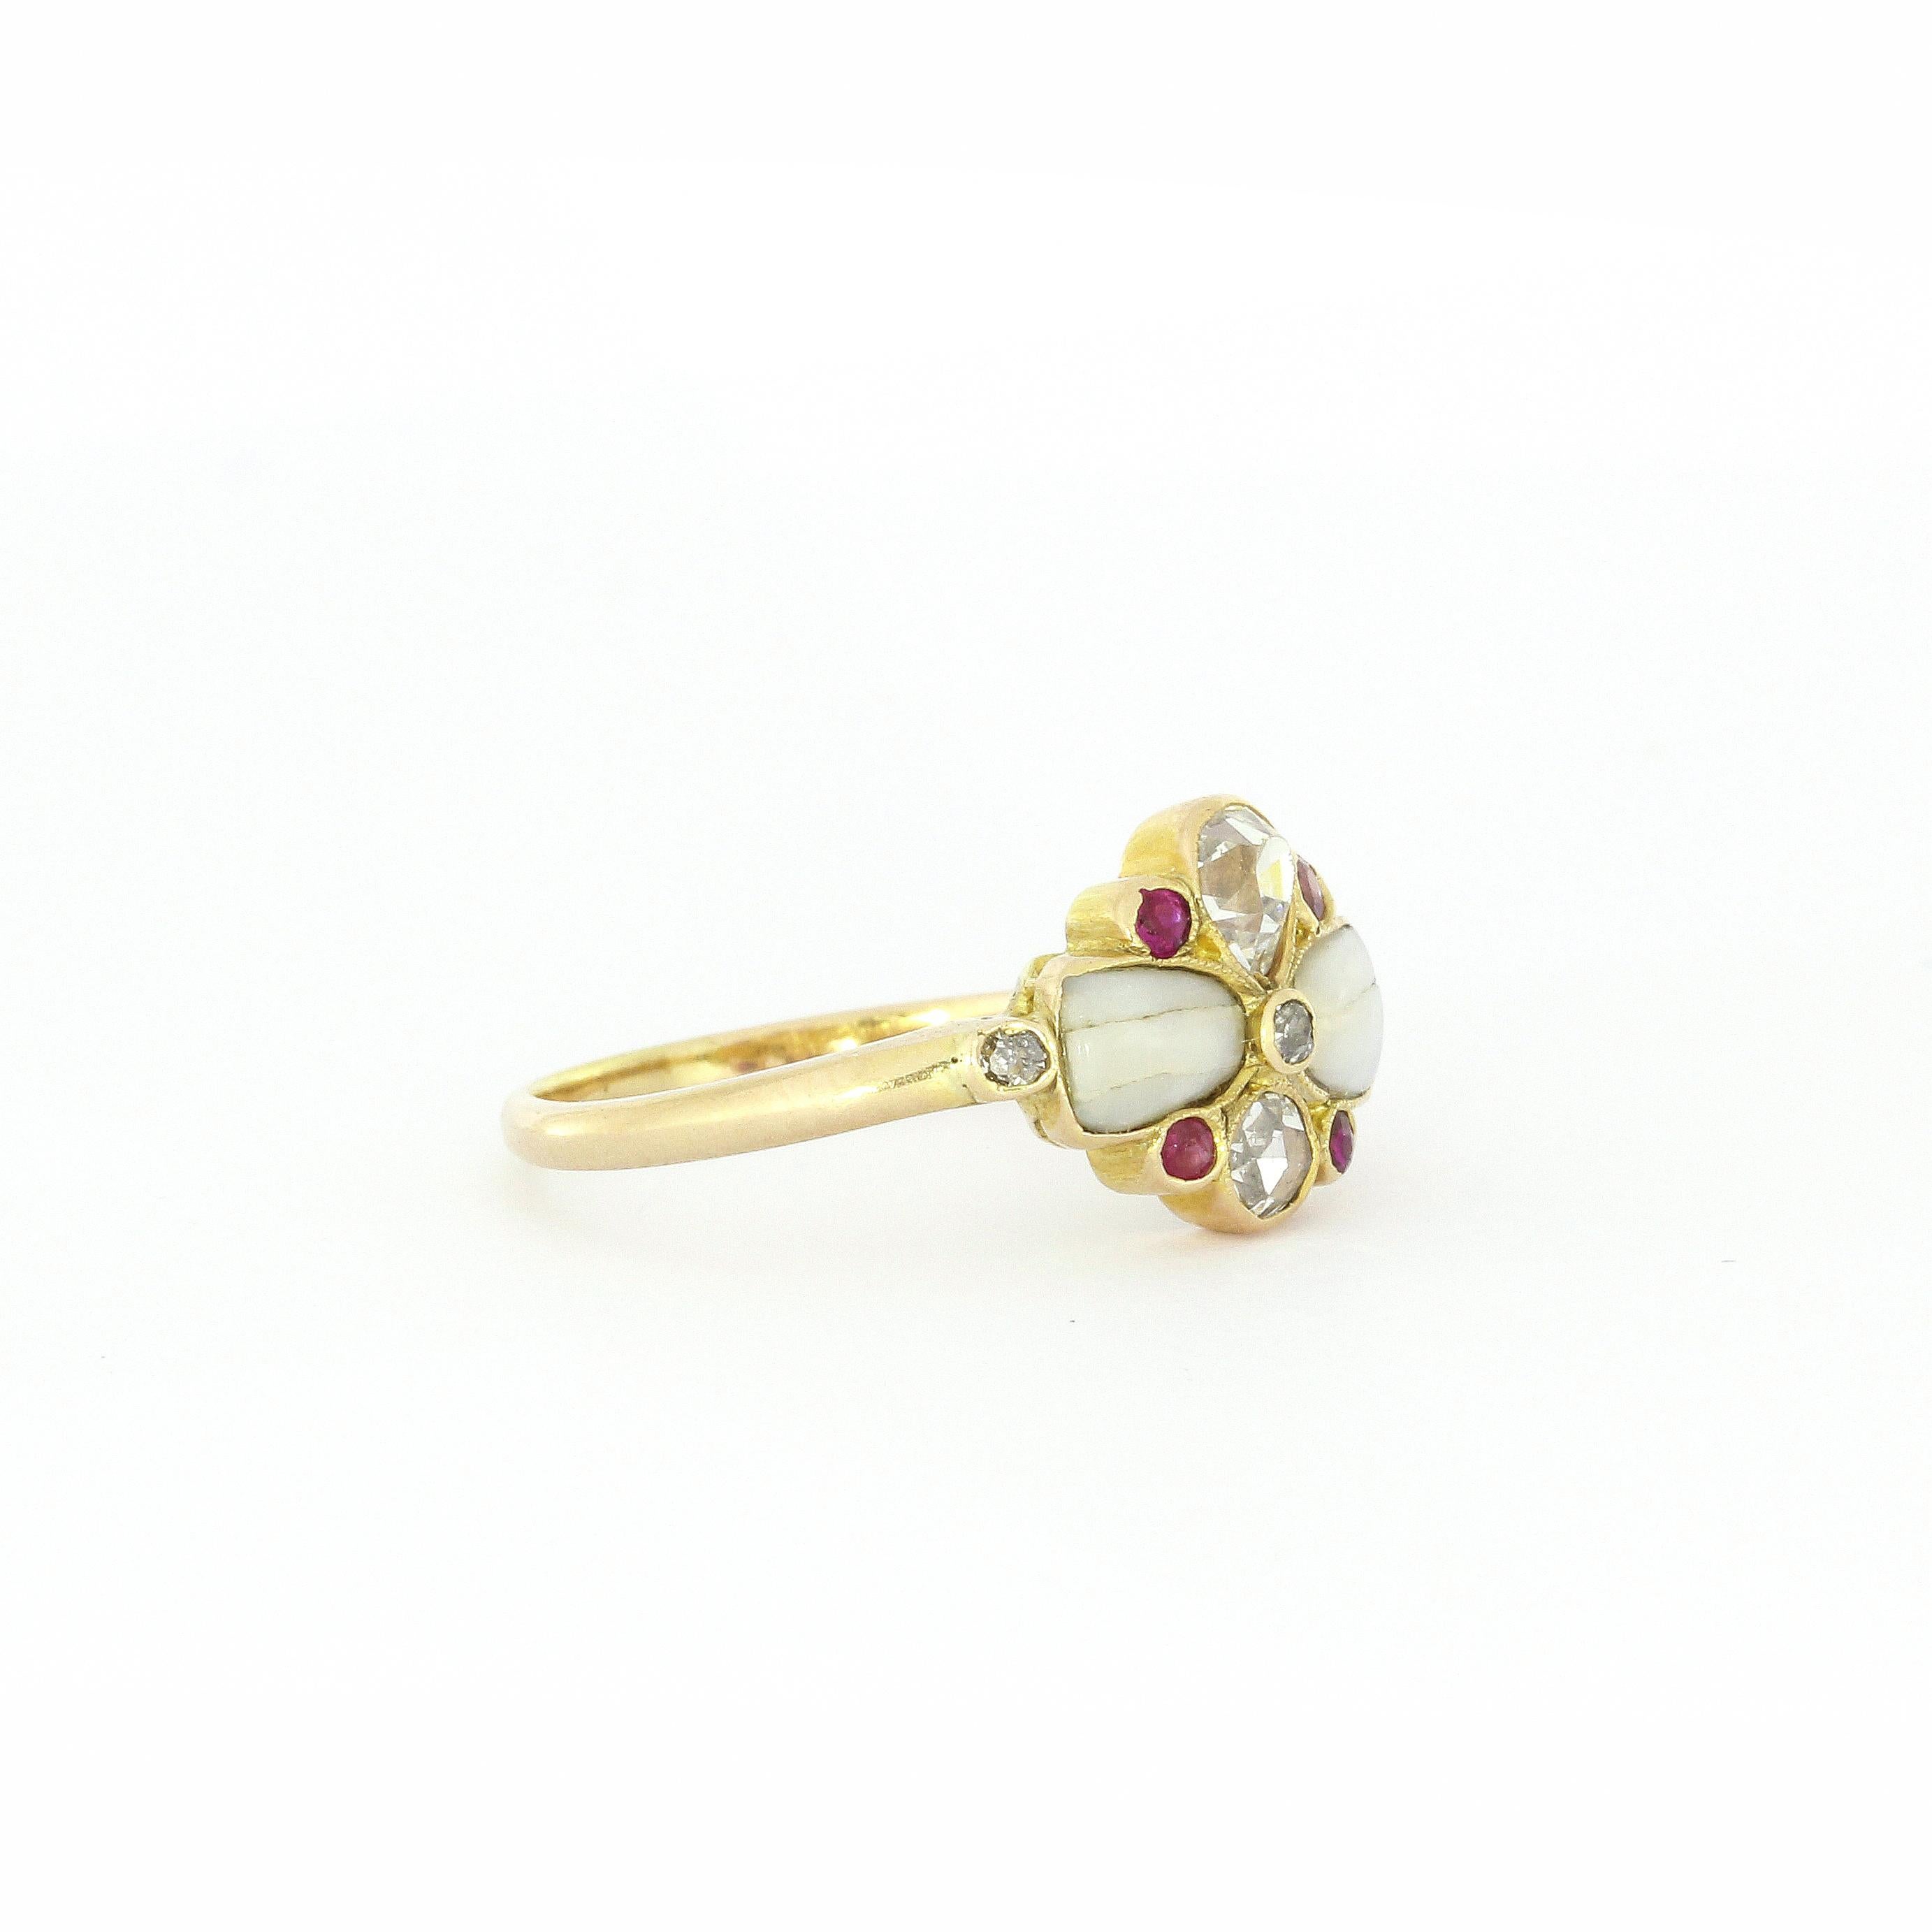 Art Nouveau Floral Diamond Ruby Ring in Yellow Gold 2